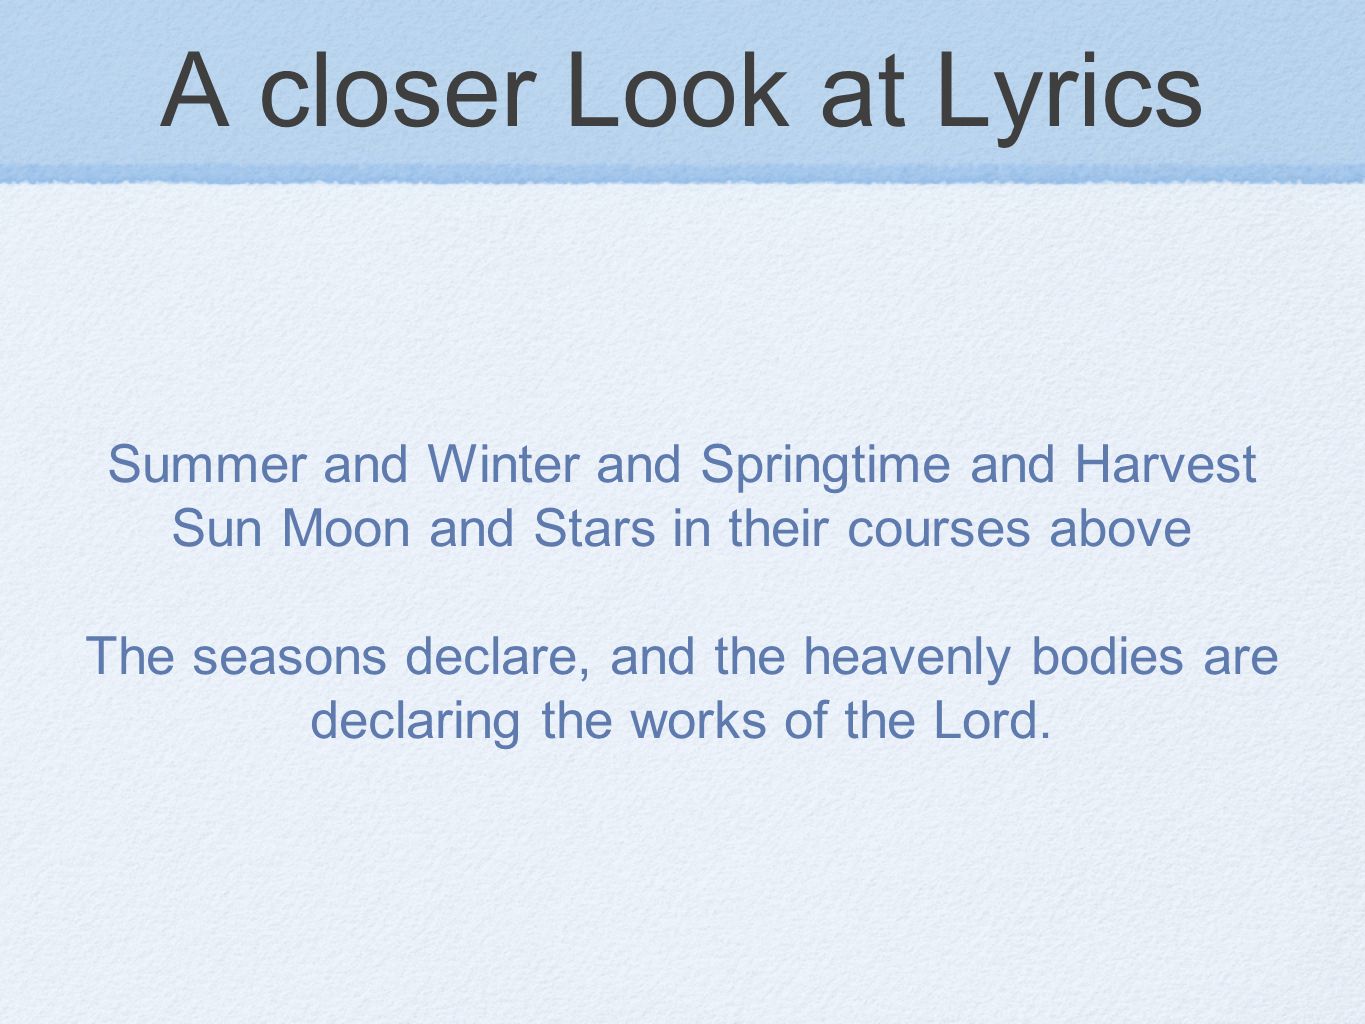 A closer Look at Lyrics Summer and Winter and Springtime and Harvest Sun Moon and Stars in their courses above The seasons declare, and the heavenly bodies are declaring the works of the Lord.